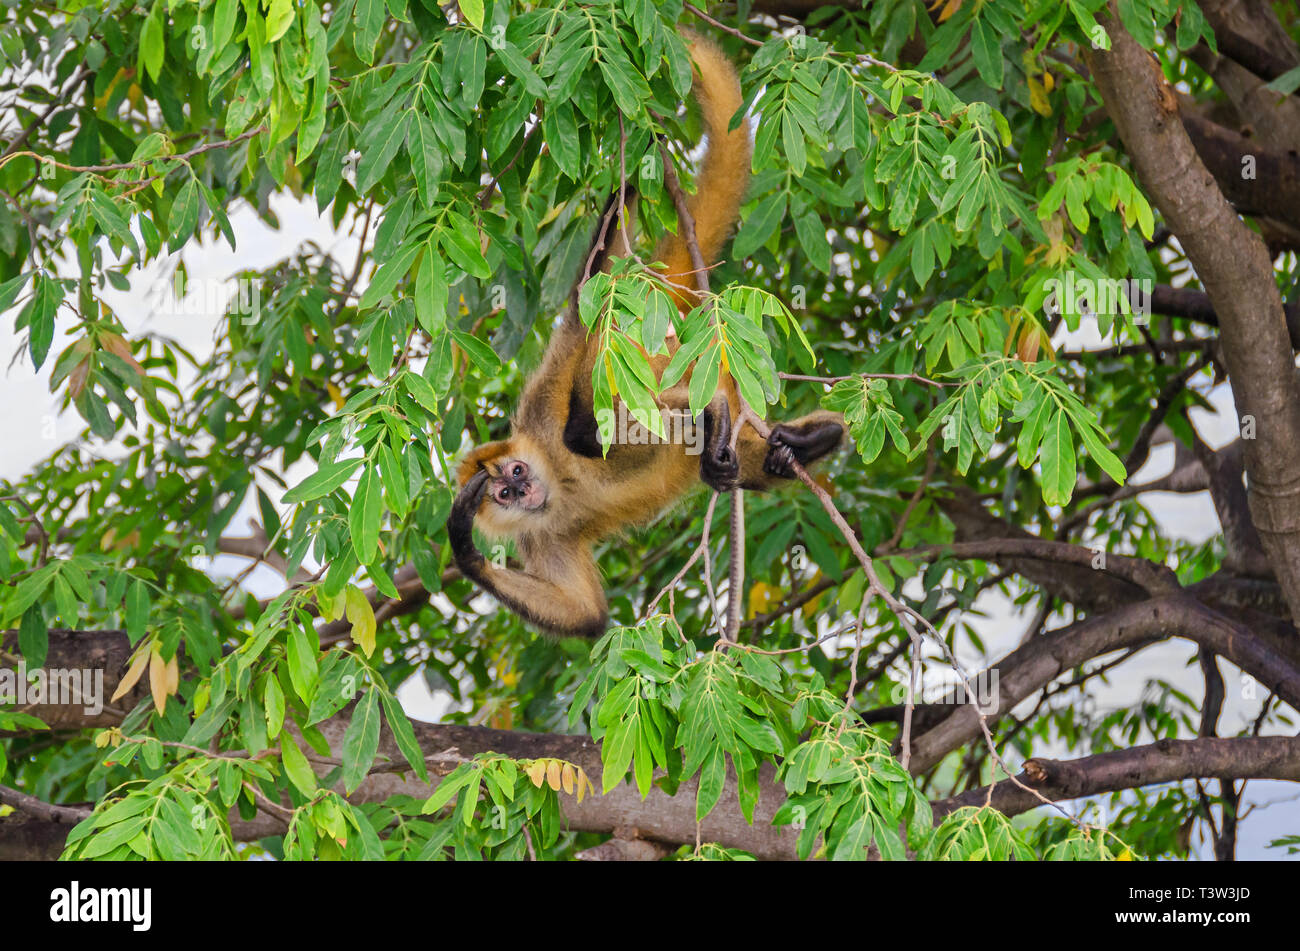 Geoffroy's spider monkey (Ateles geoffroyi ornatus), also known as the black-handed spider monkey, the largest New World monkeys hanging on his tail o Stock Photo